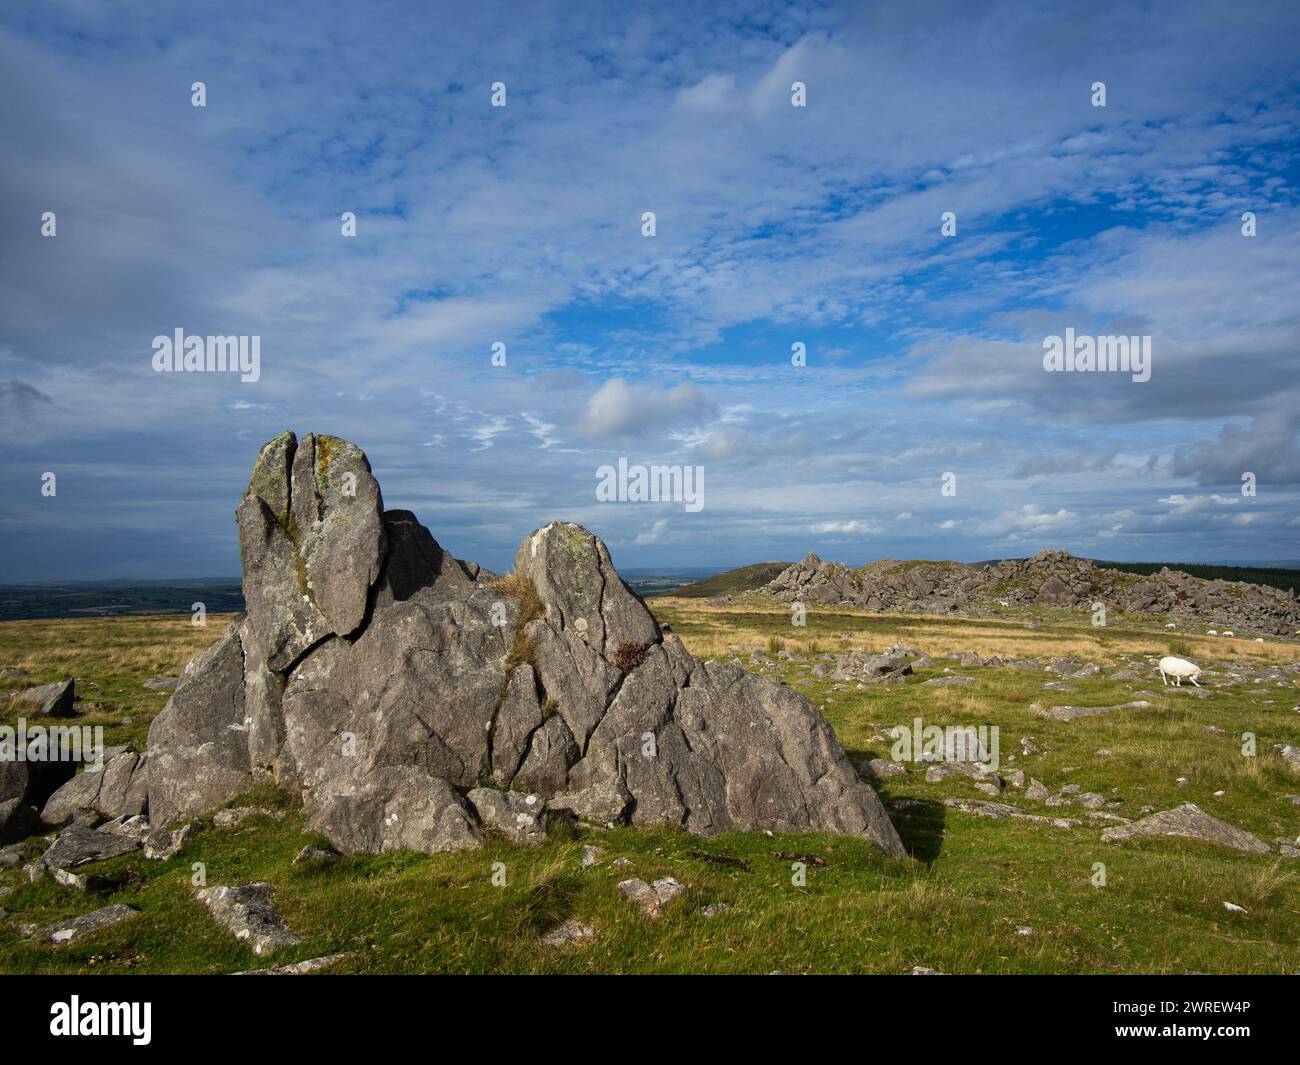 A rocky outcrop in the Preseli Hills, North Pembroke, Wales, United Kingdom.  Some of the Bluestones used at Stonehenge were transported from here. Stock Photo